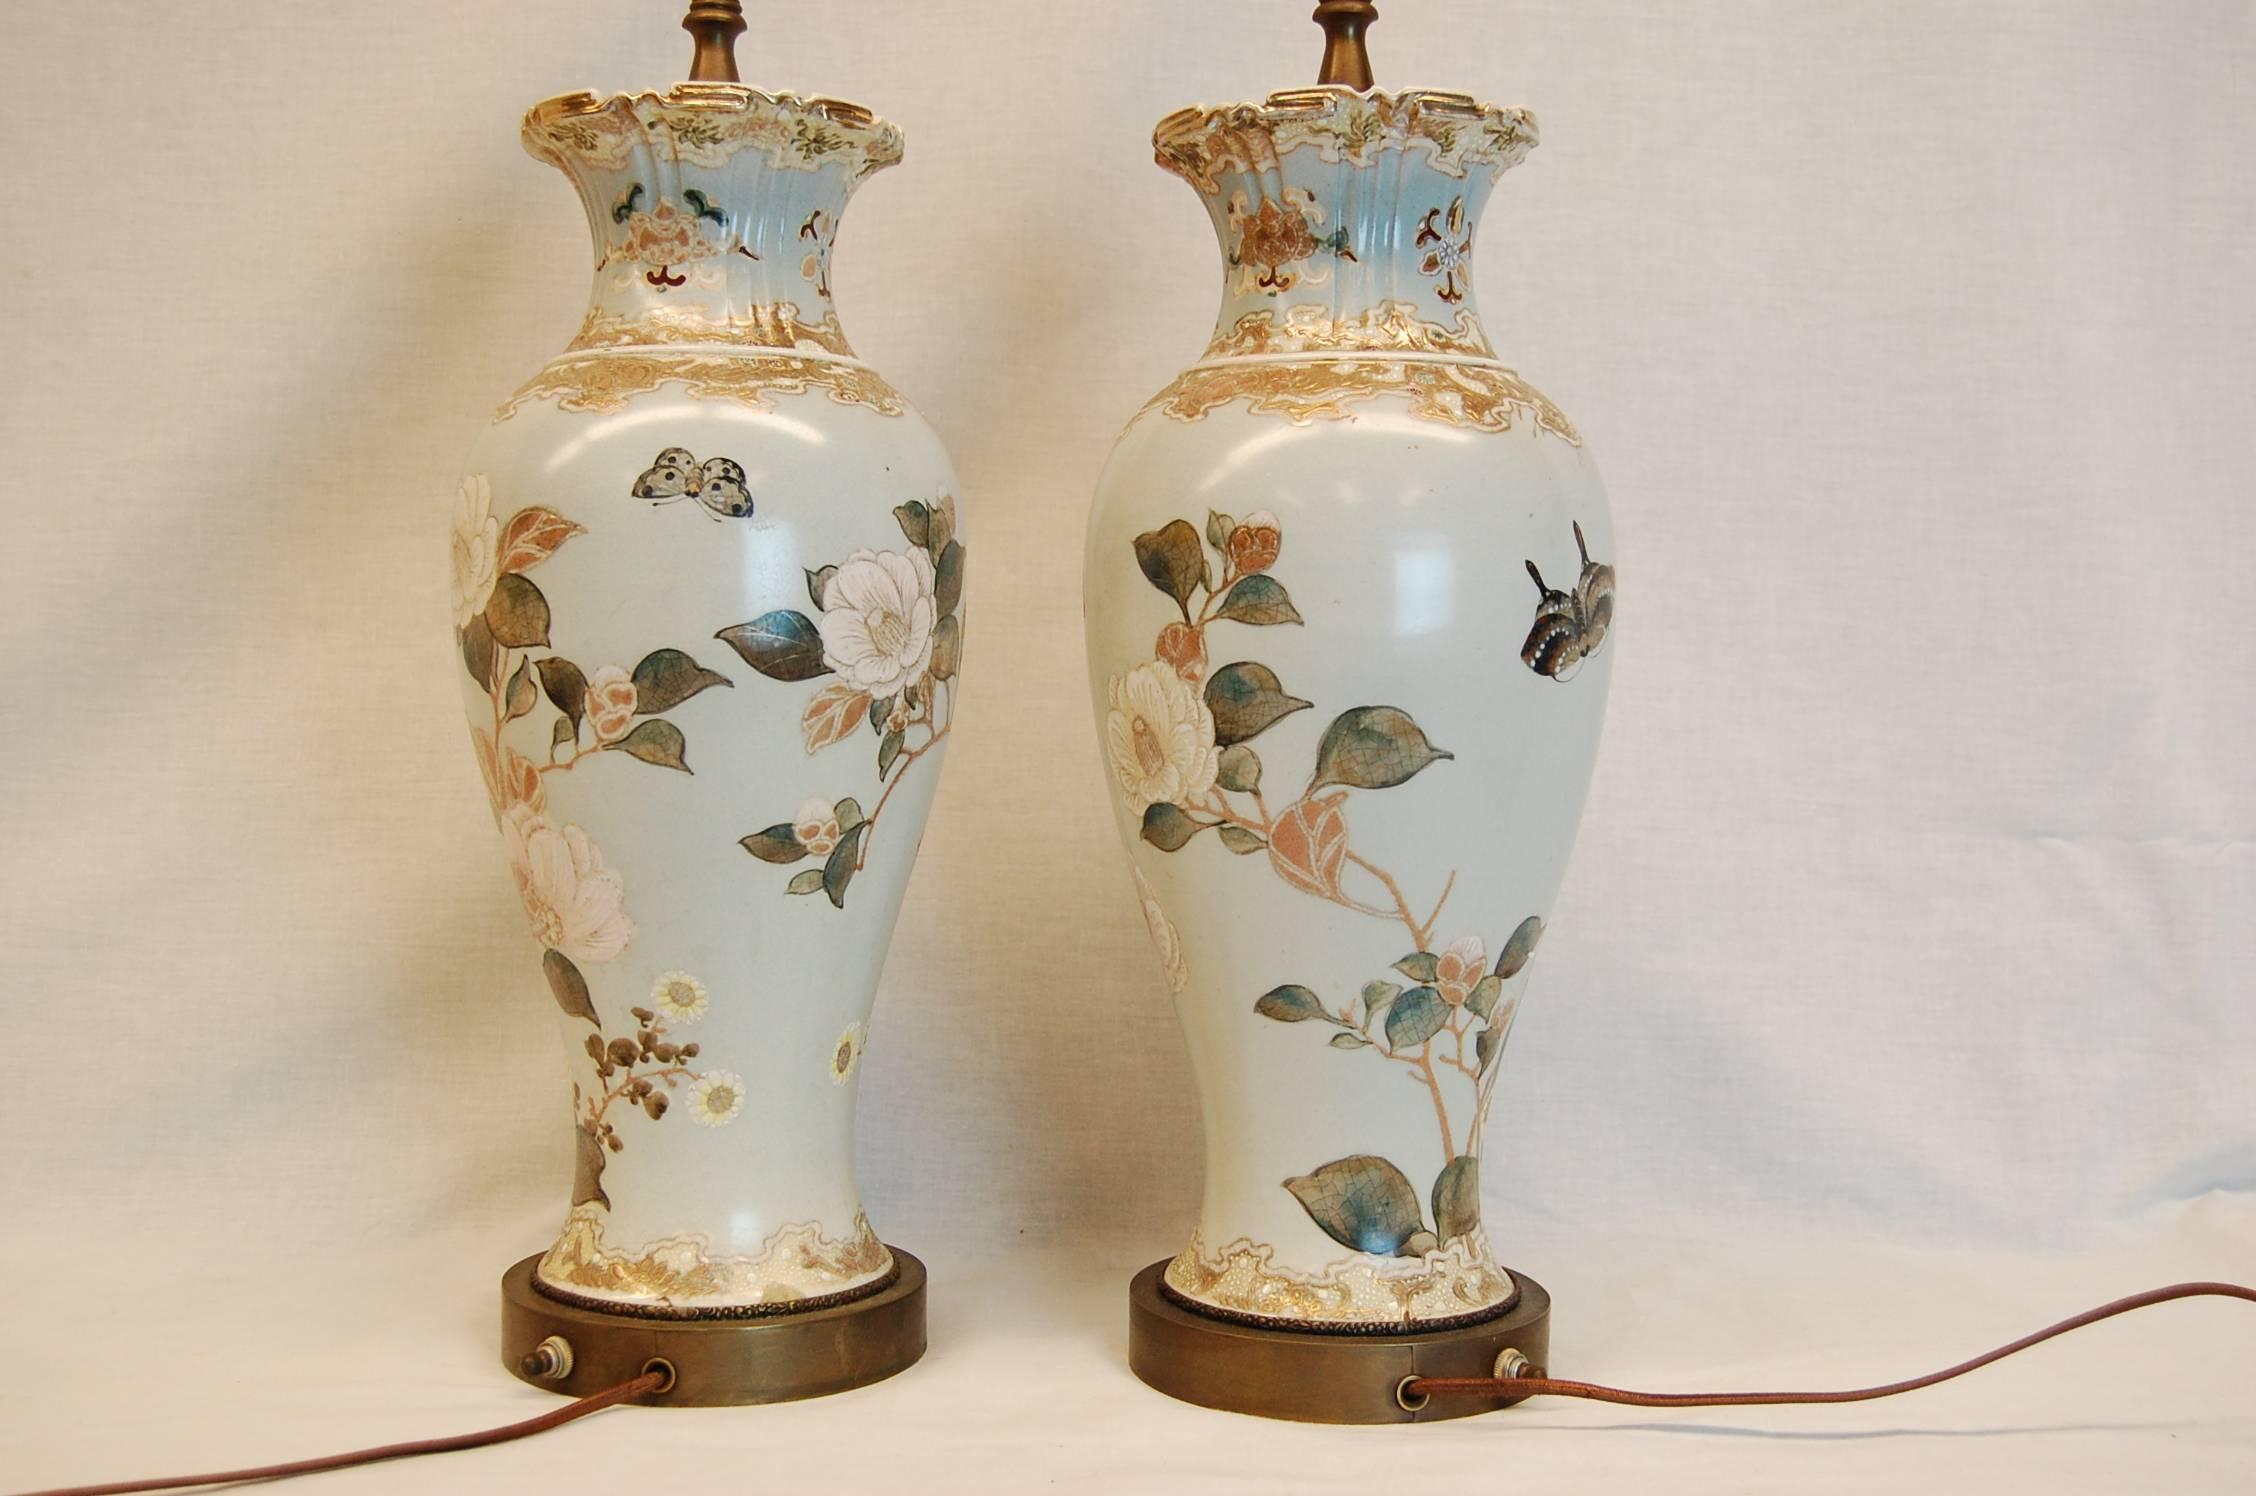 Pair of lamps with beautiful Magnolia blossoms decorations on a pale blue background. The urns themselves measure 15 1/4 inches tall. Excellent condition.